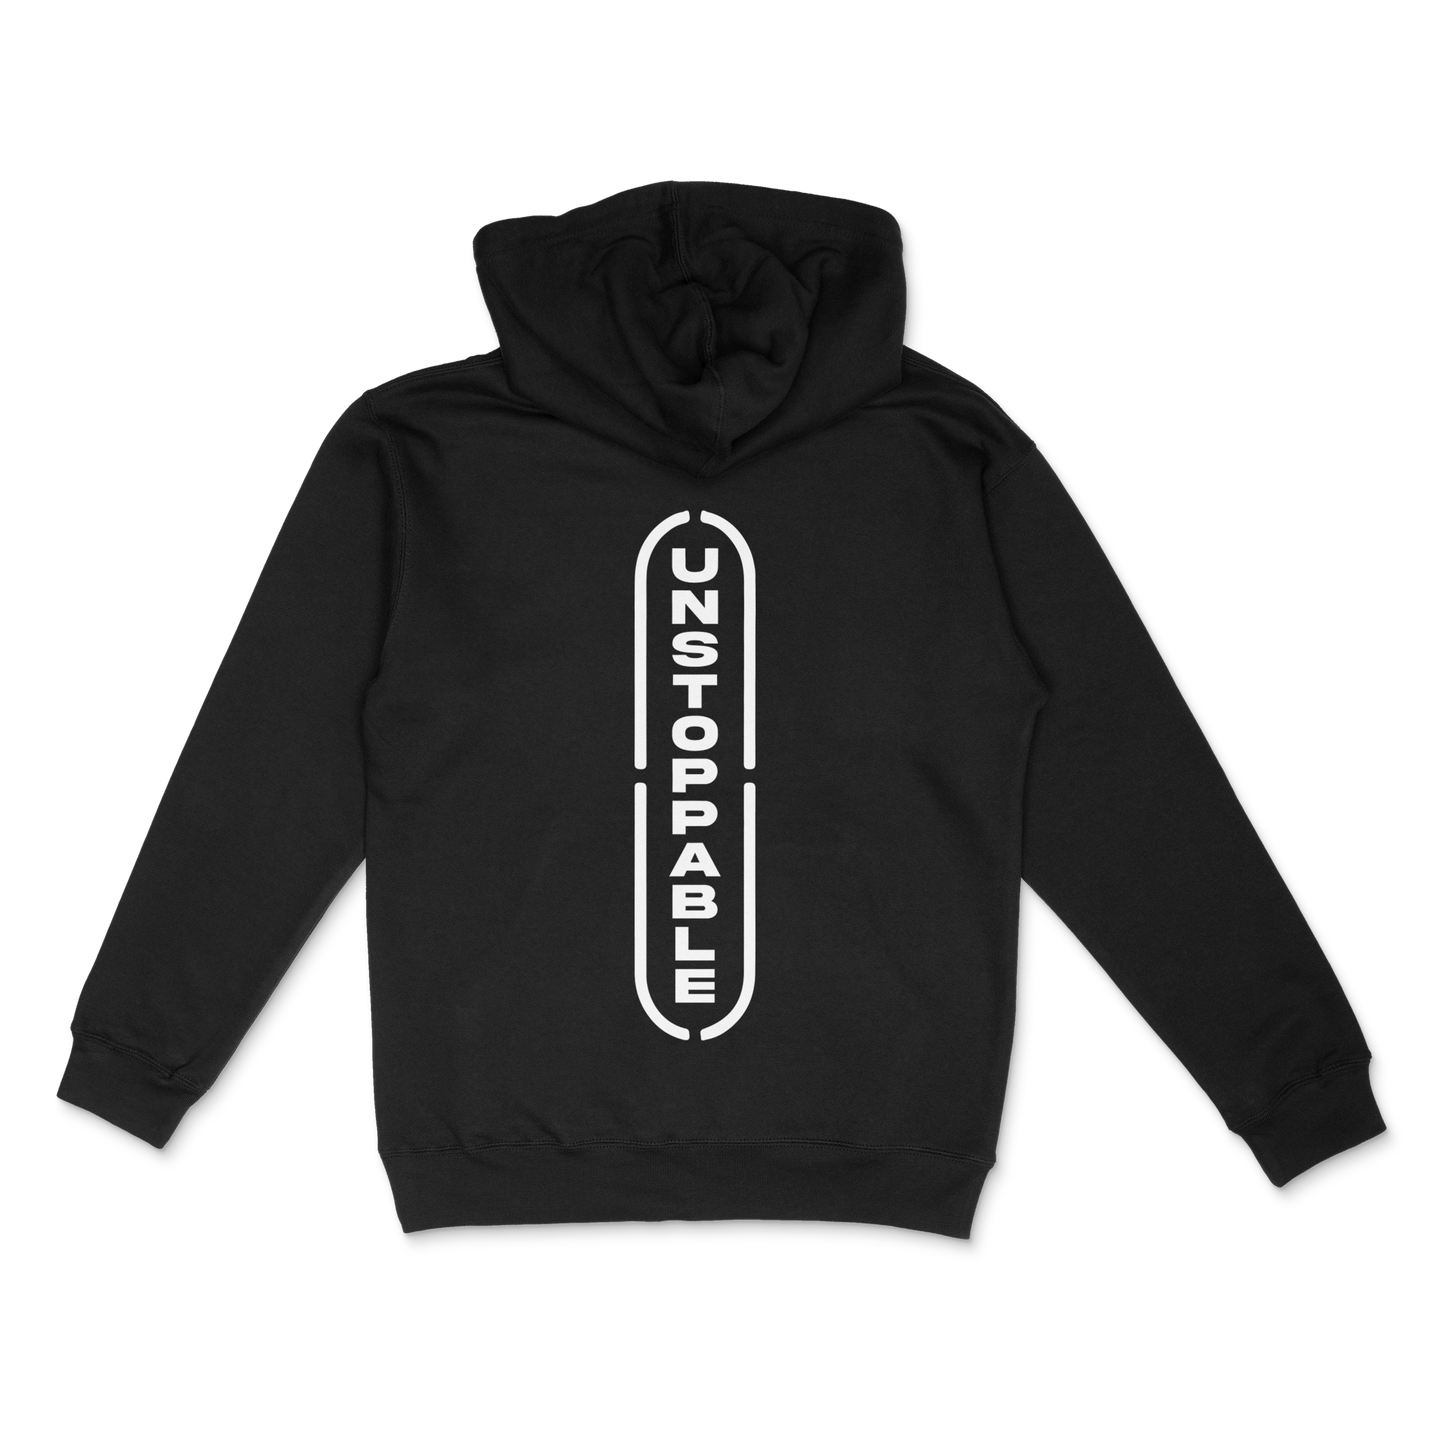 The Unstoppable Hoodie from Invincible - Black